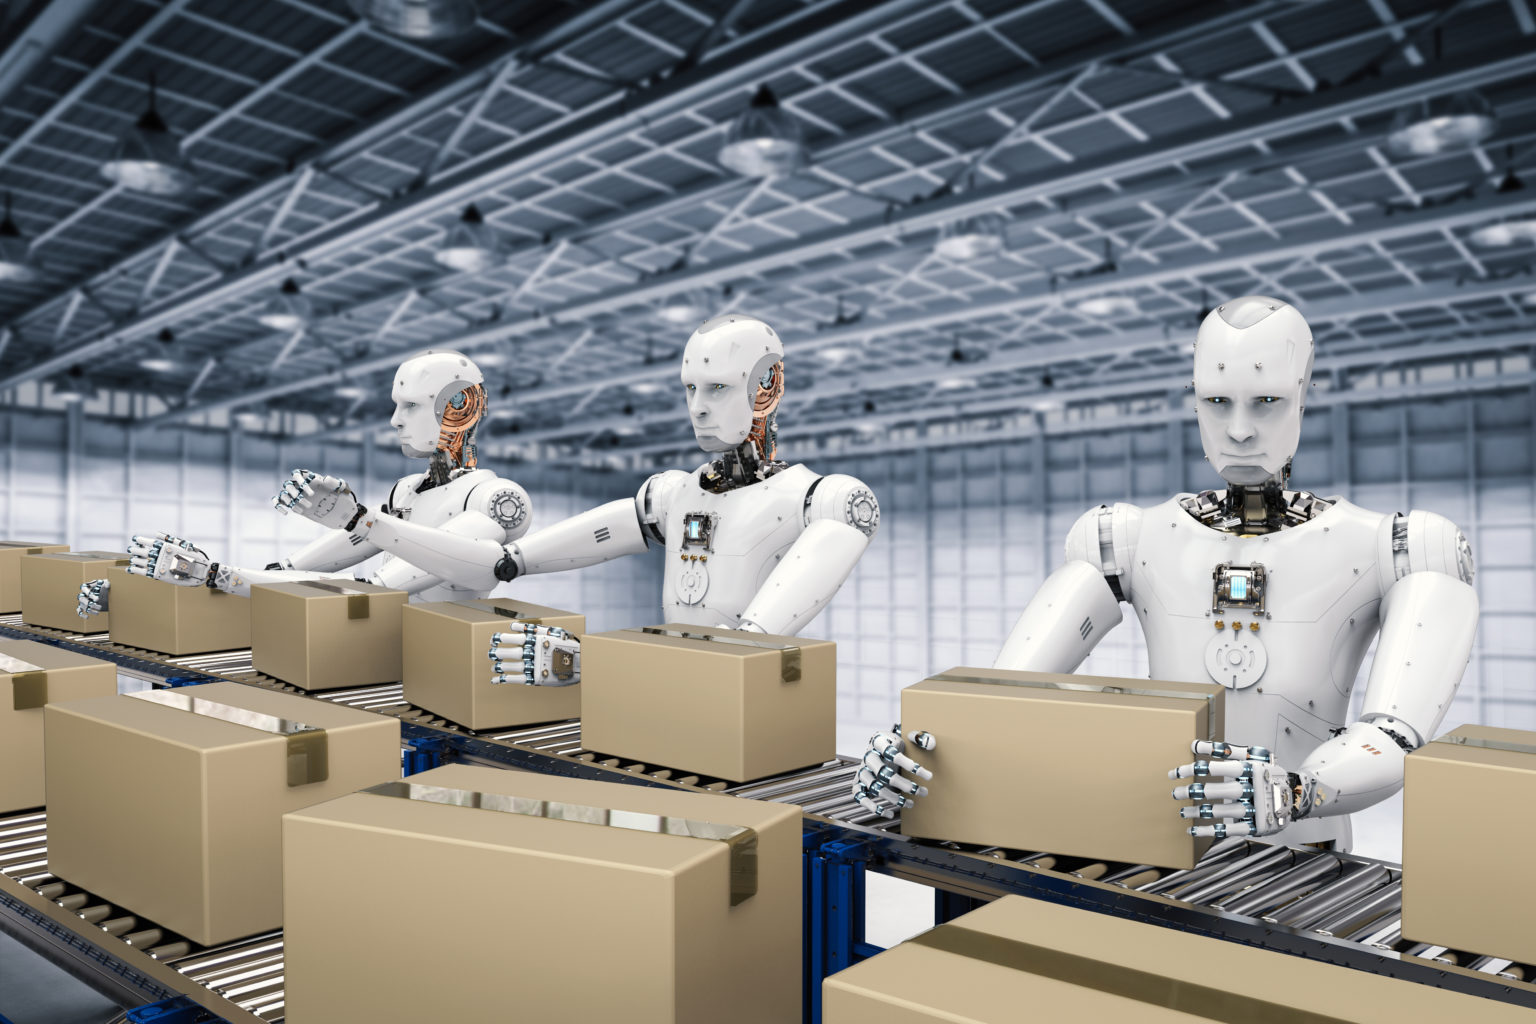 15 millions jobs in Britain at stake with Artificial Intelligence robots se...